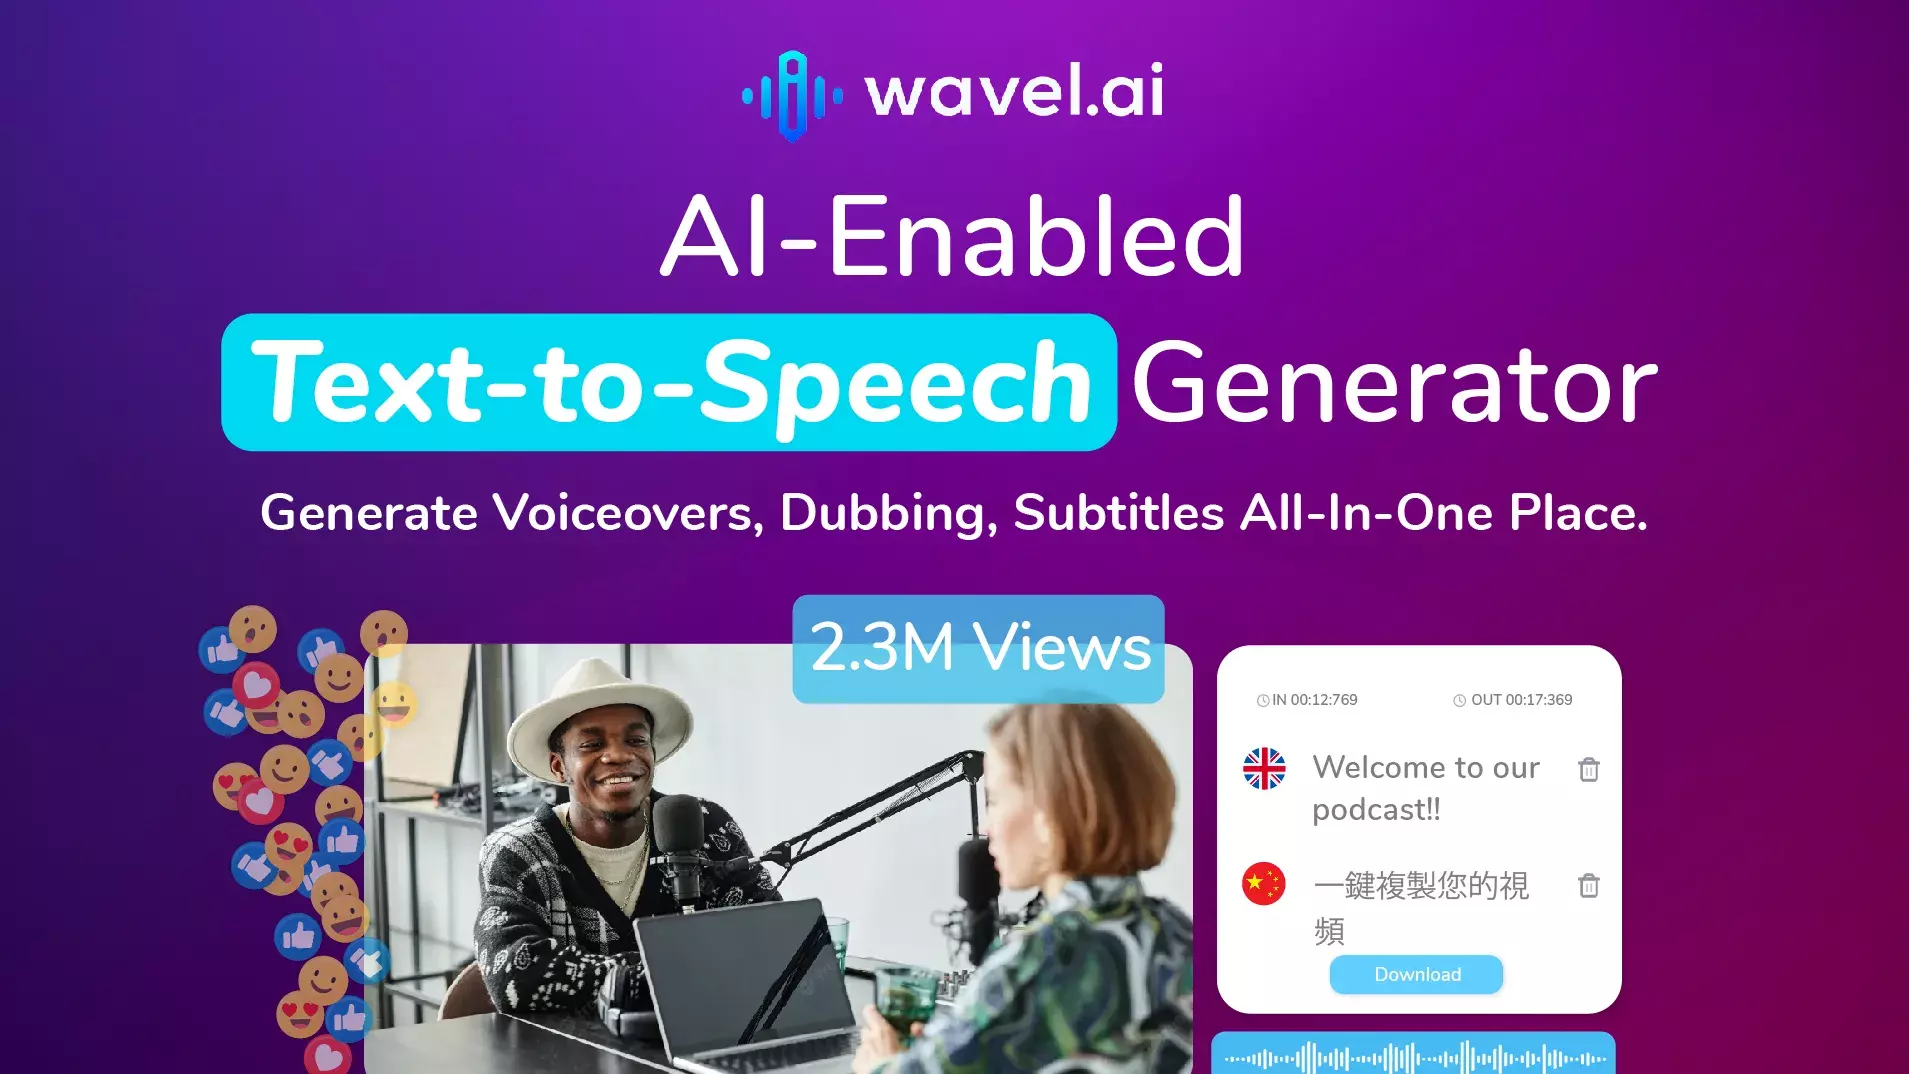 Wavel.ai - A platform with video solutions, including subtitling and voiceovers